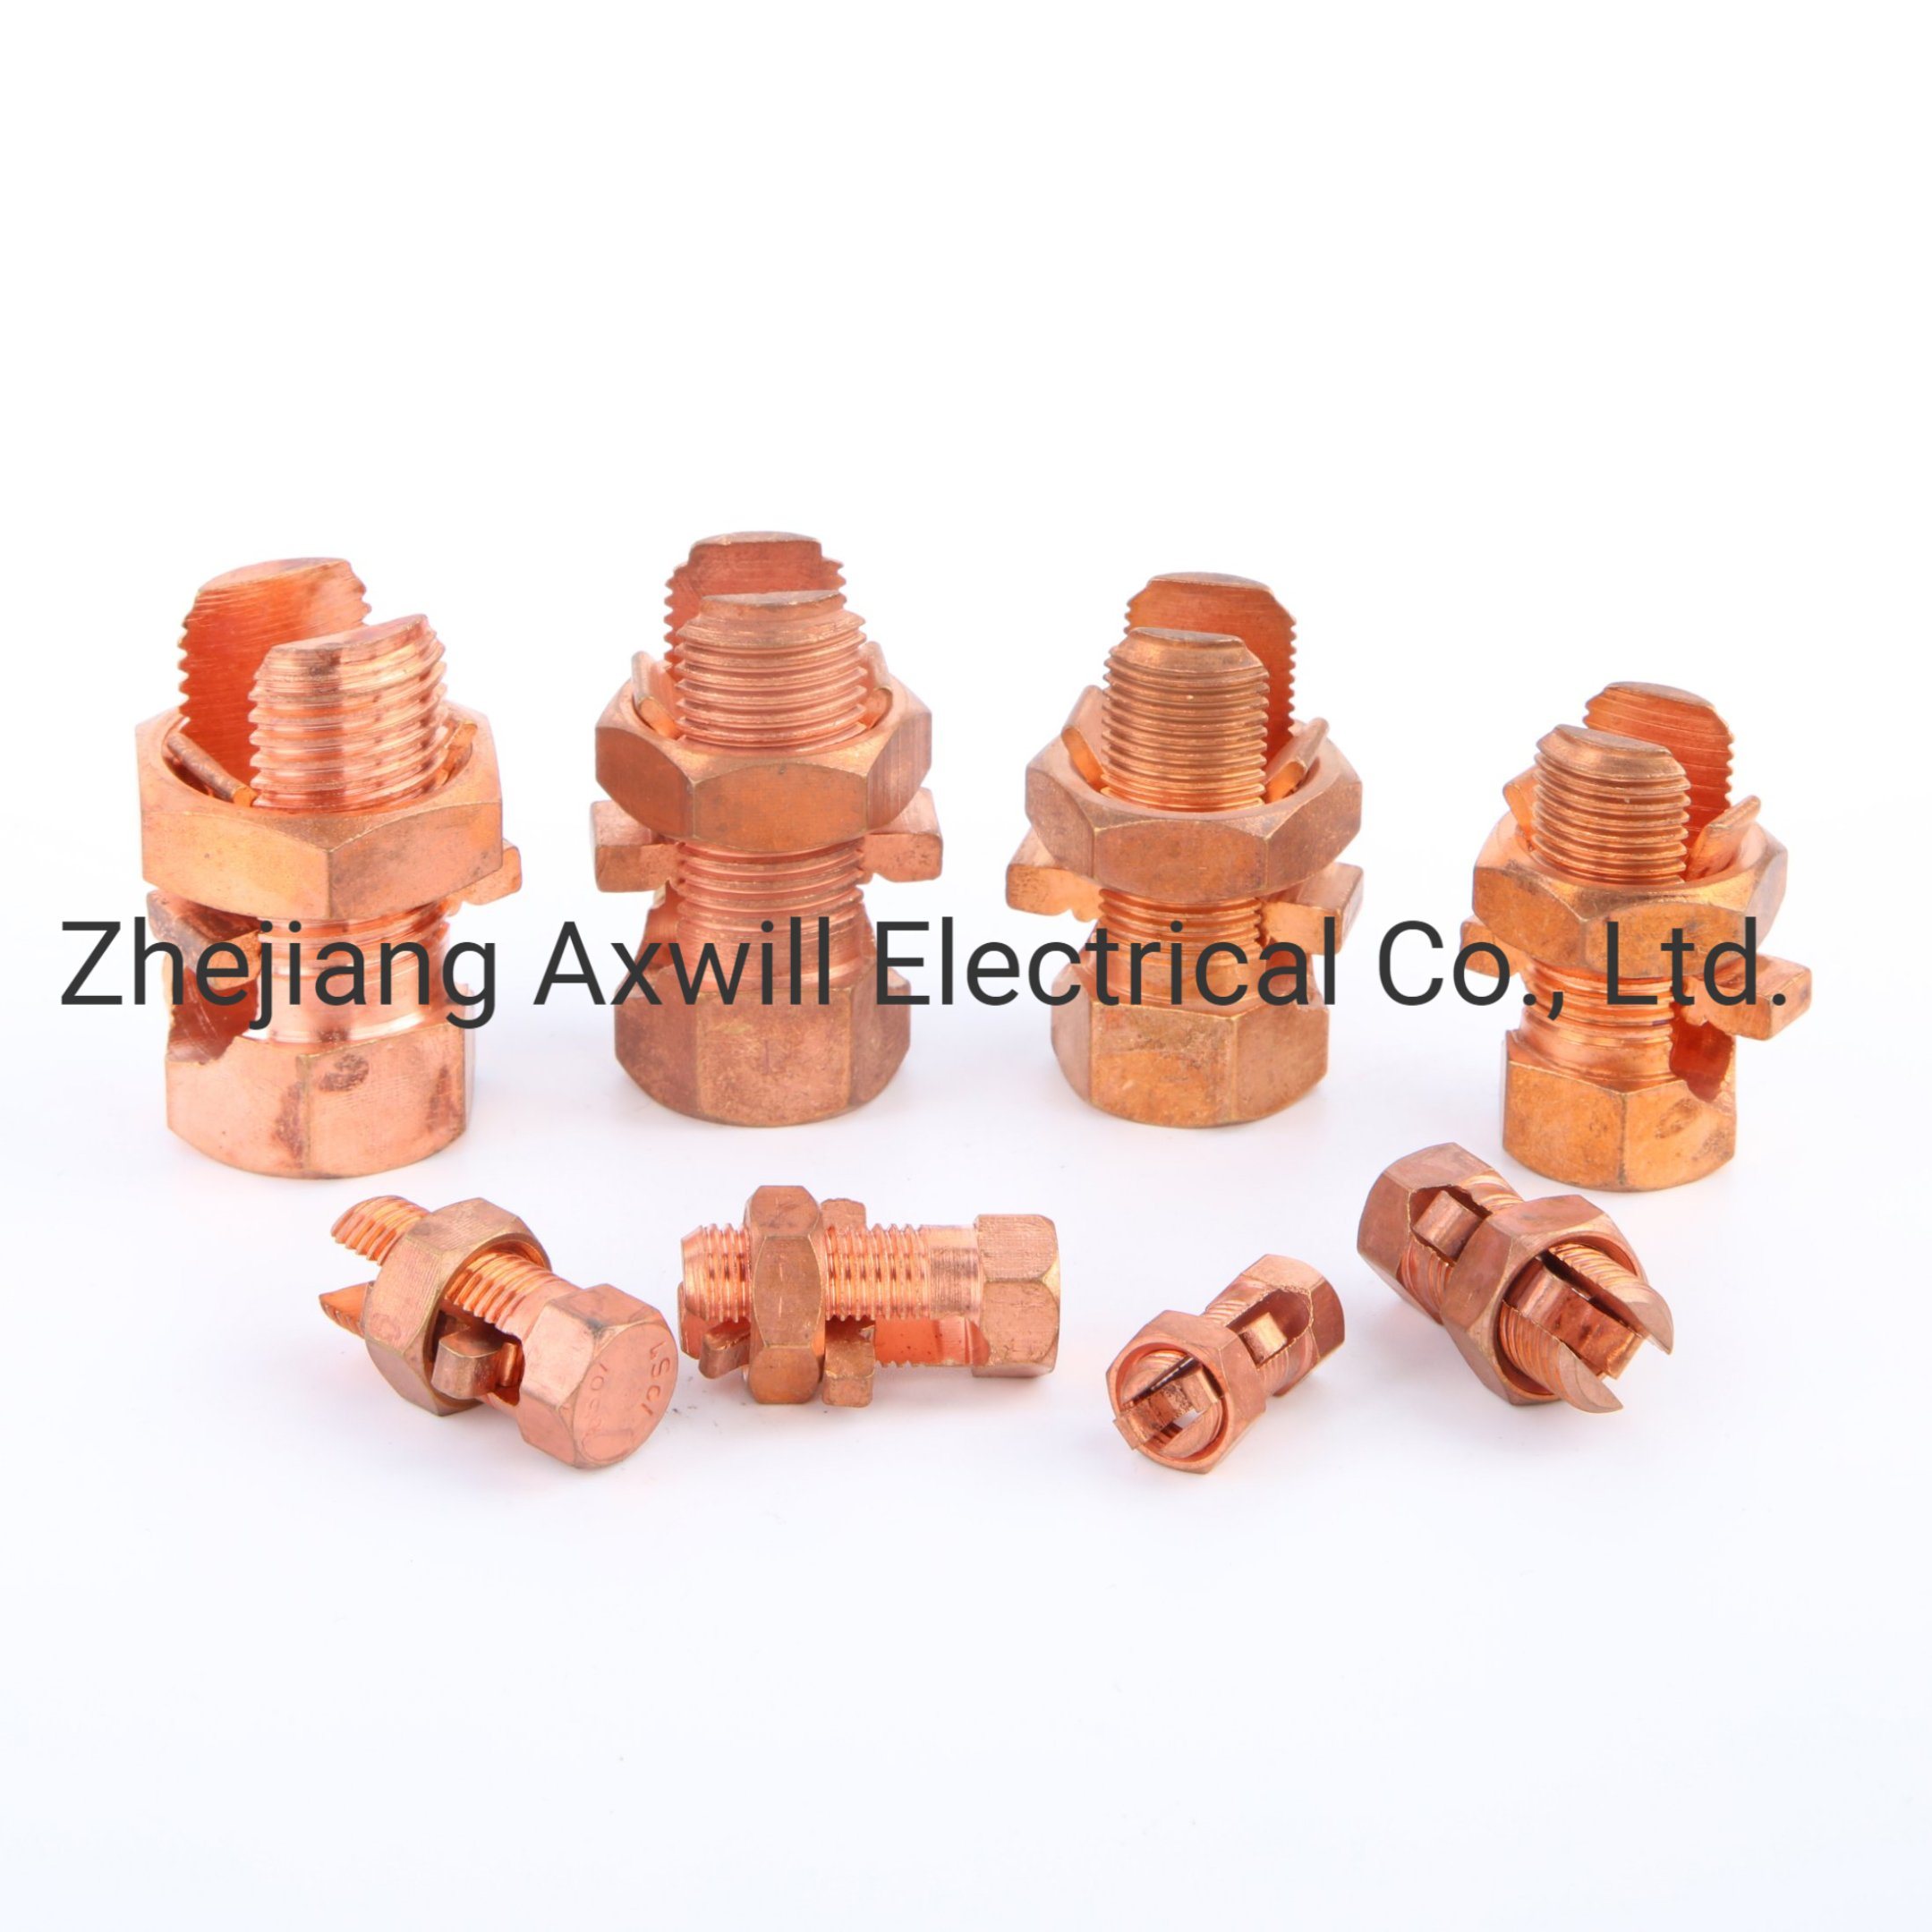 Nickle Plated Brass Adaptor for Flexible Conduit Hose 32mm